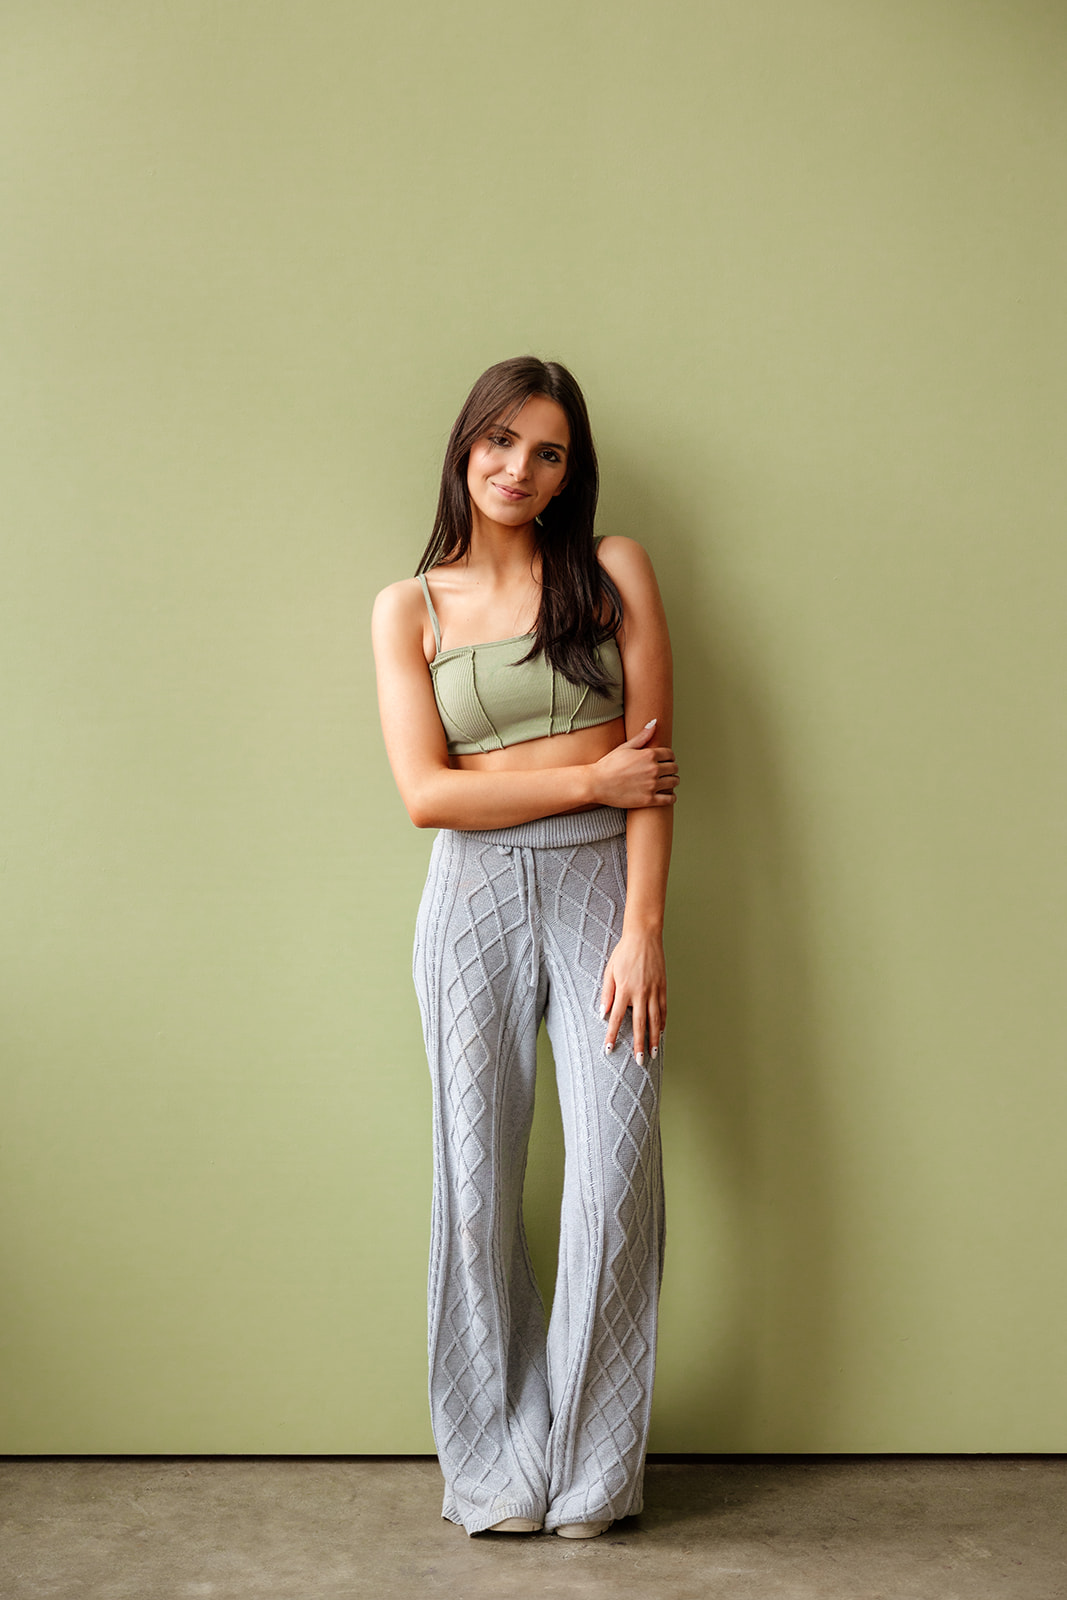 Full-body photo of a teen girl fashionably dressed in front of an olive green backdrop in a Seattle studio.